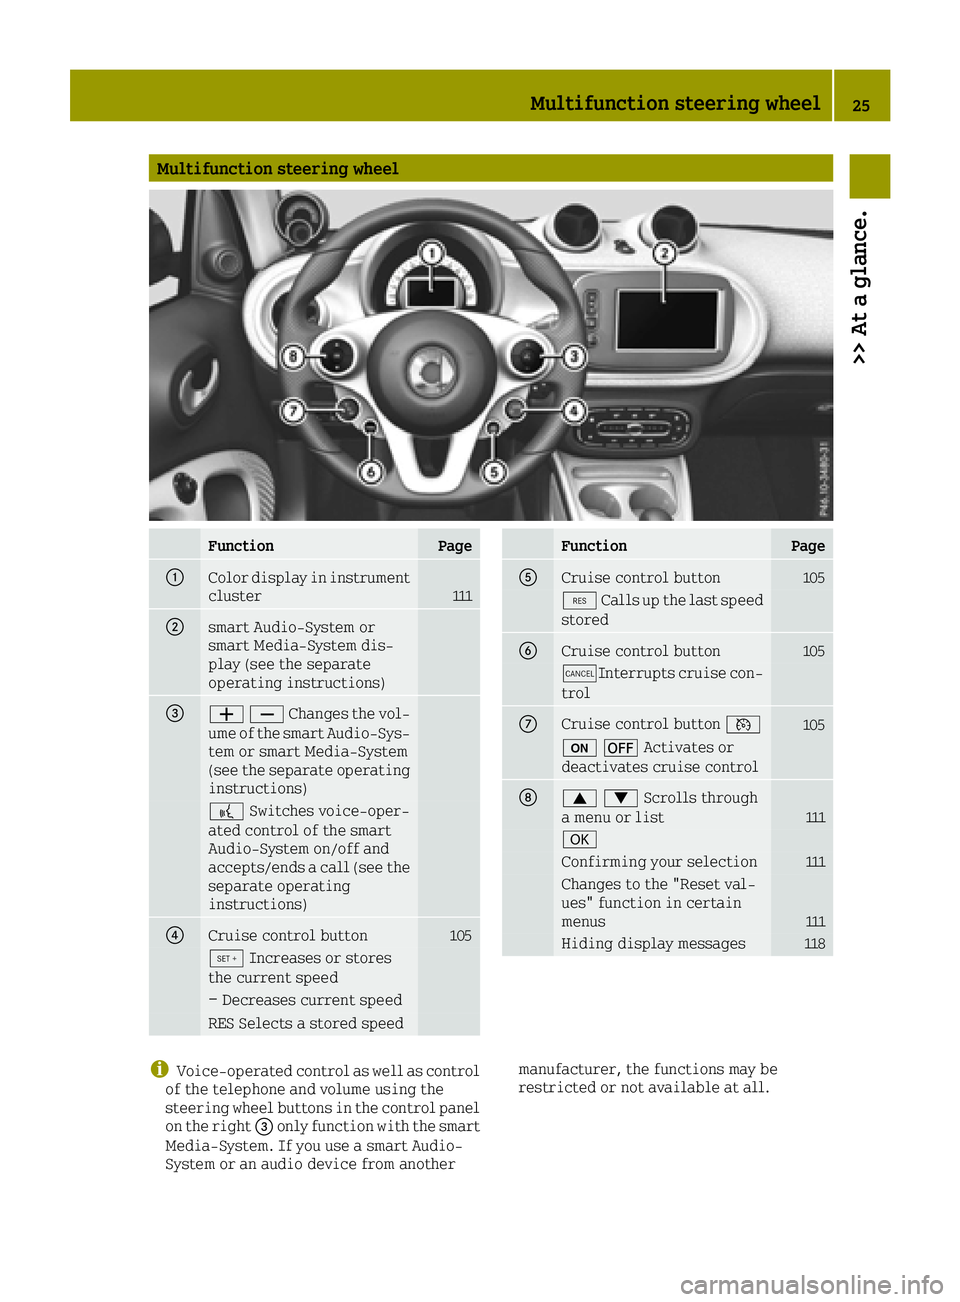 SMART FORTWO 2016  Owners Manual Multifunction steering wheel
FunctionPage
0043Color display in instrument
cluster111
0044smart Audio-System or
smart Media-System dis-
play (see the separate
operating instructions)
008700810082Change